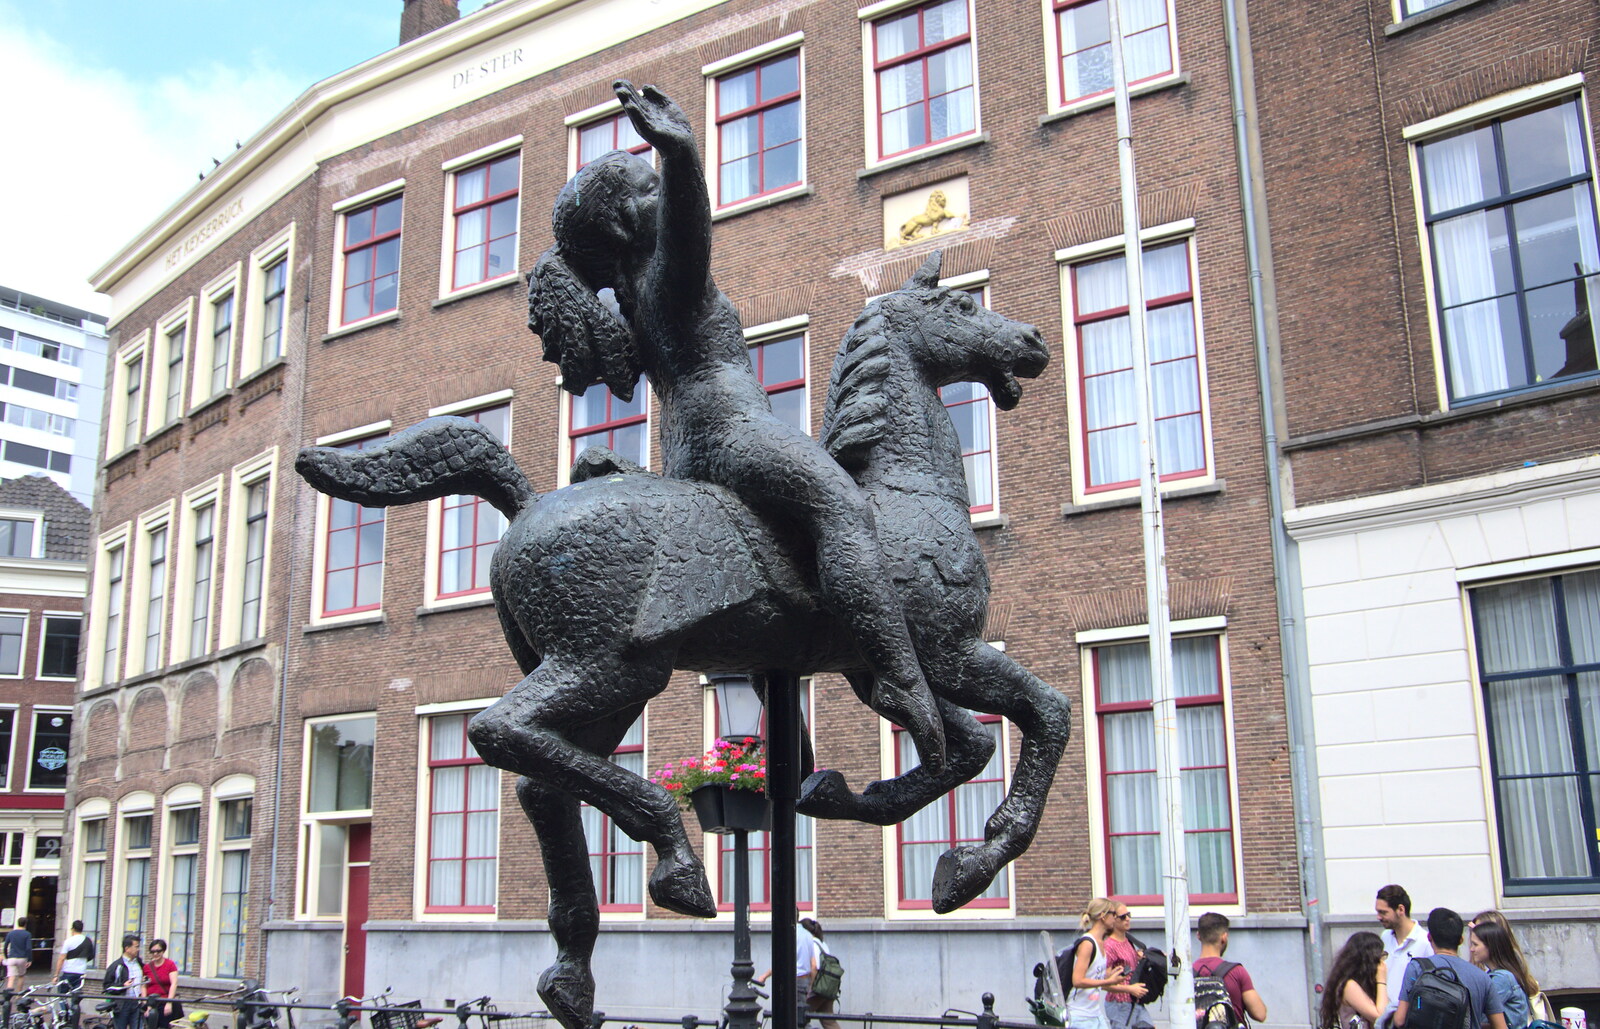 A statue of a girl with a ponytail, on a pony from A Postcard from Utrecht, Nederlands - 10th June 2018